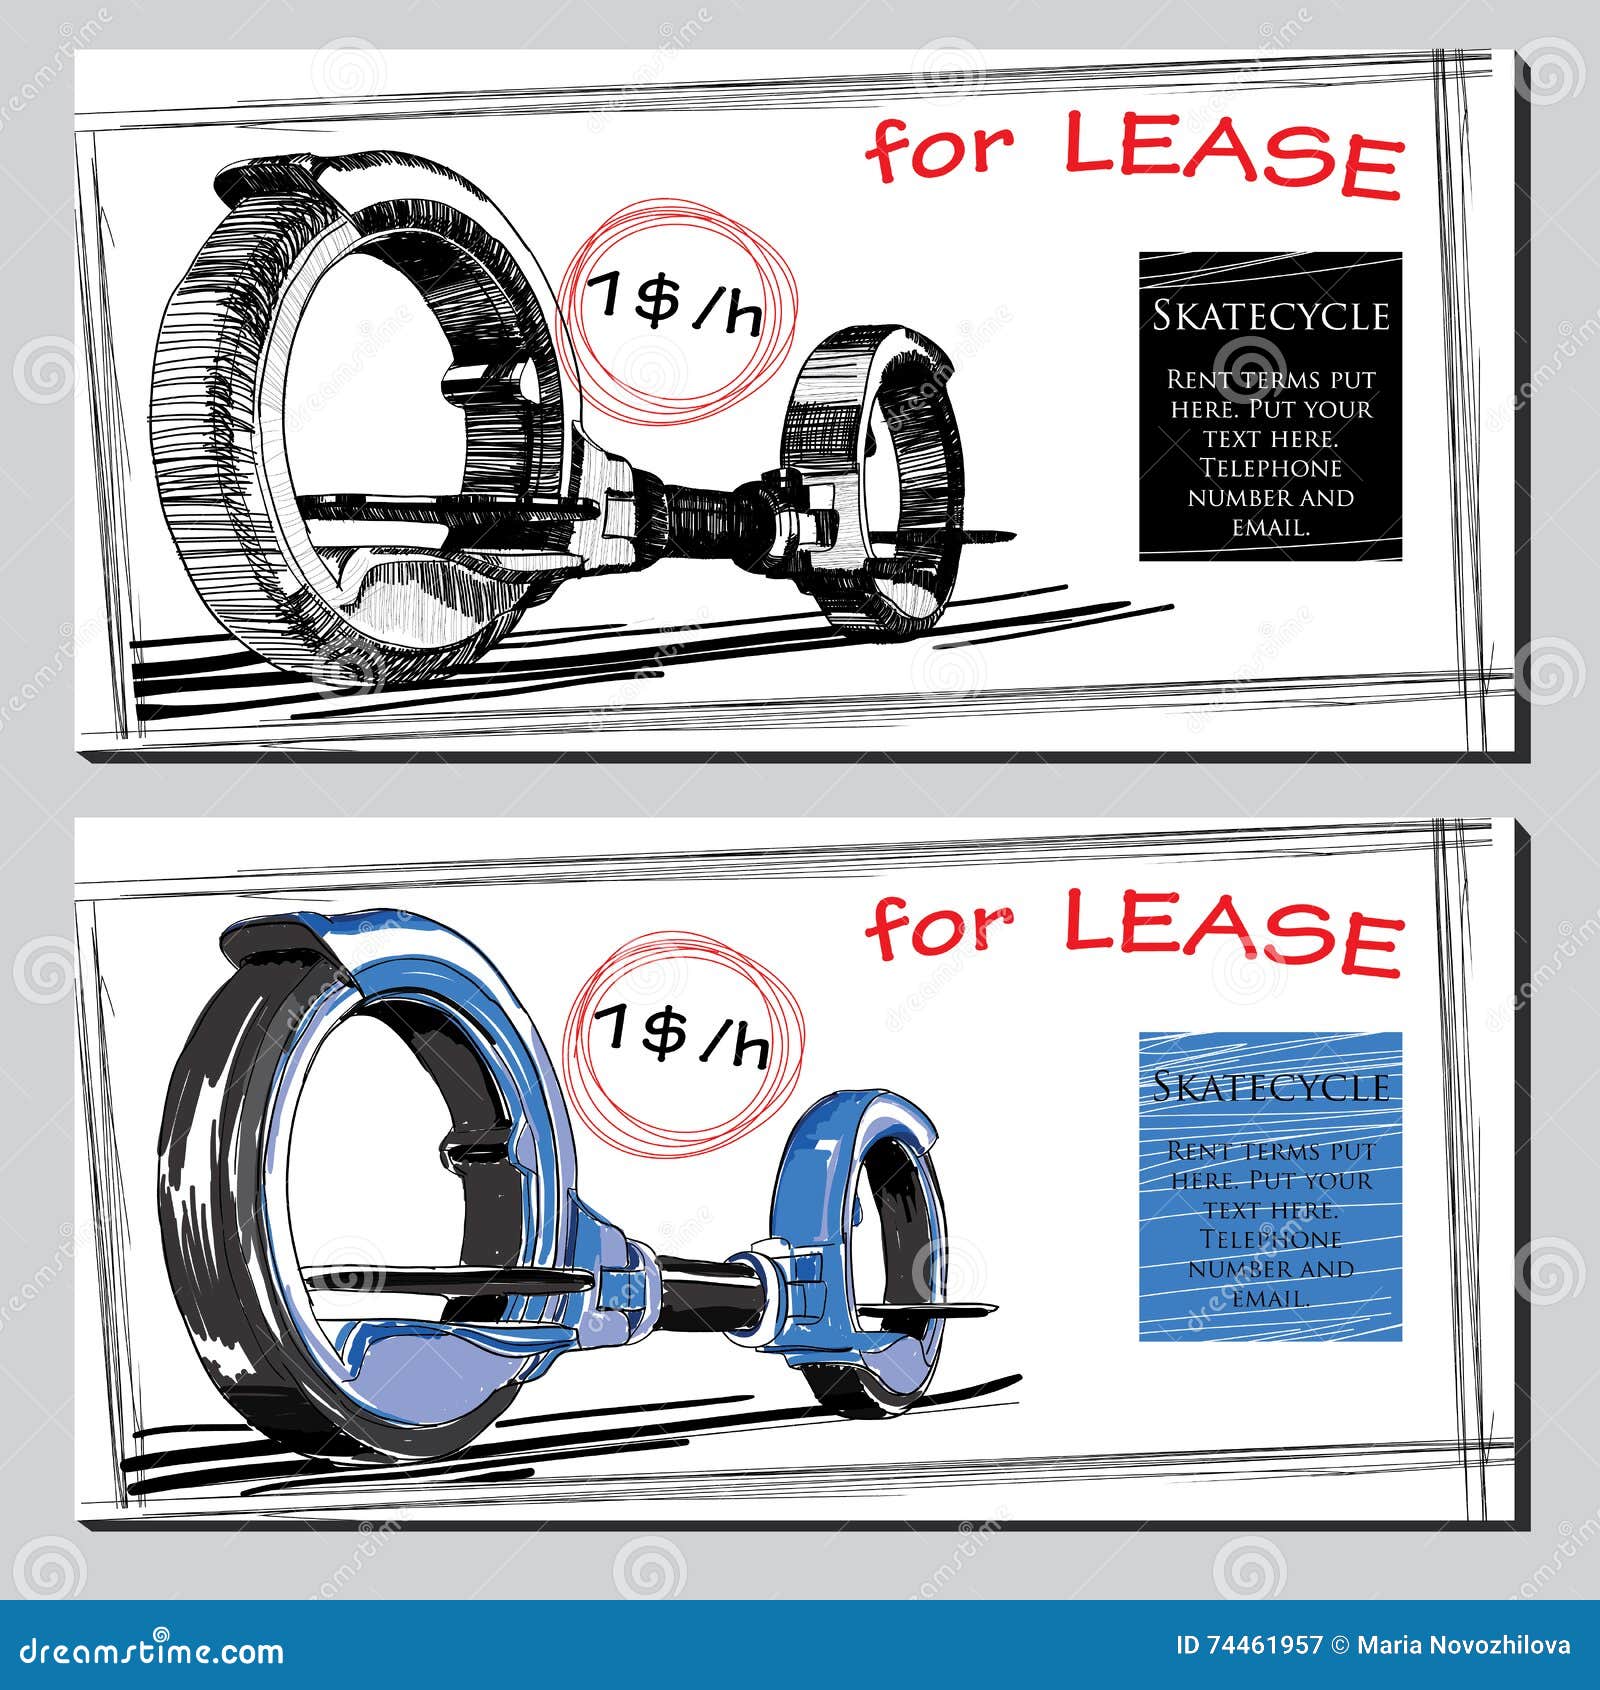 set lease brochure hand drawn skate cycle with price. template f